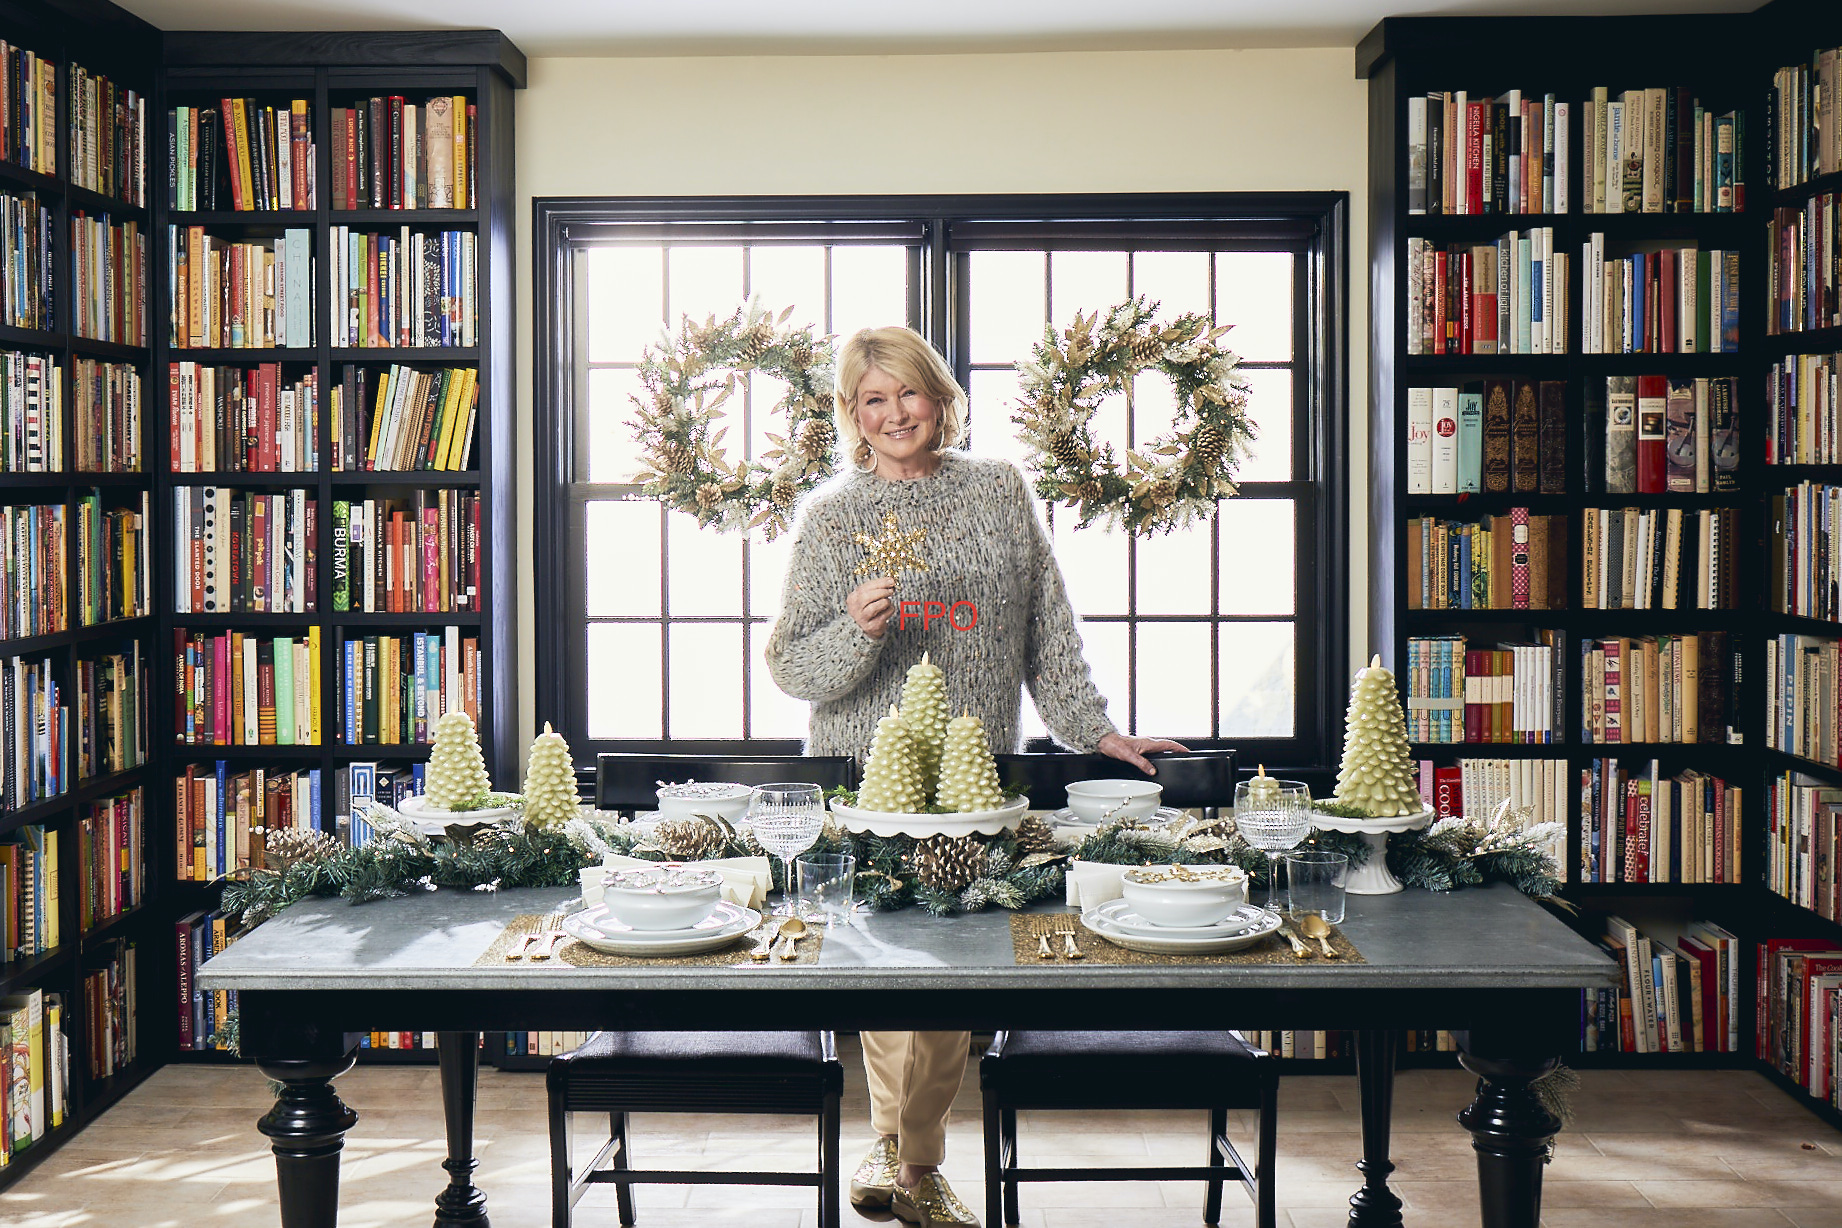 Martha Stewart Collection 30-Piece Cutlery Set, Created for Macy's - Macy's